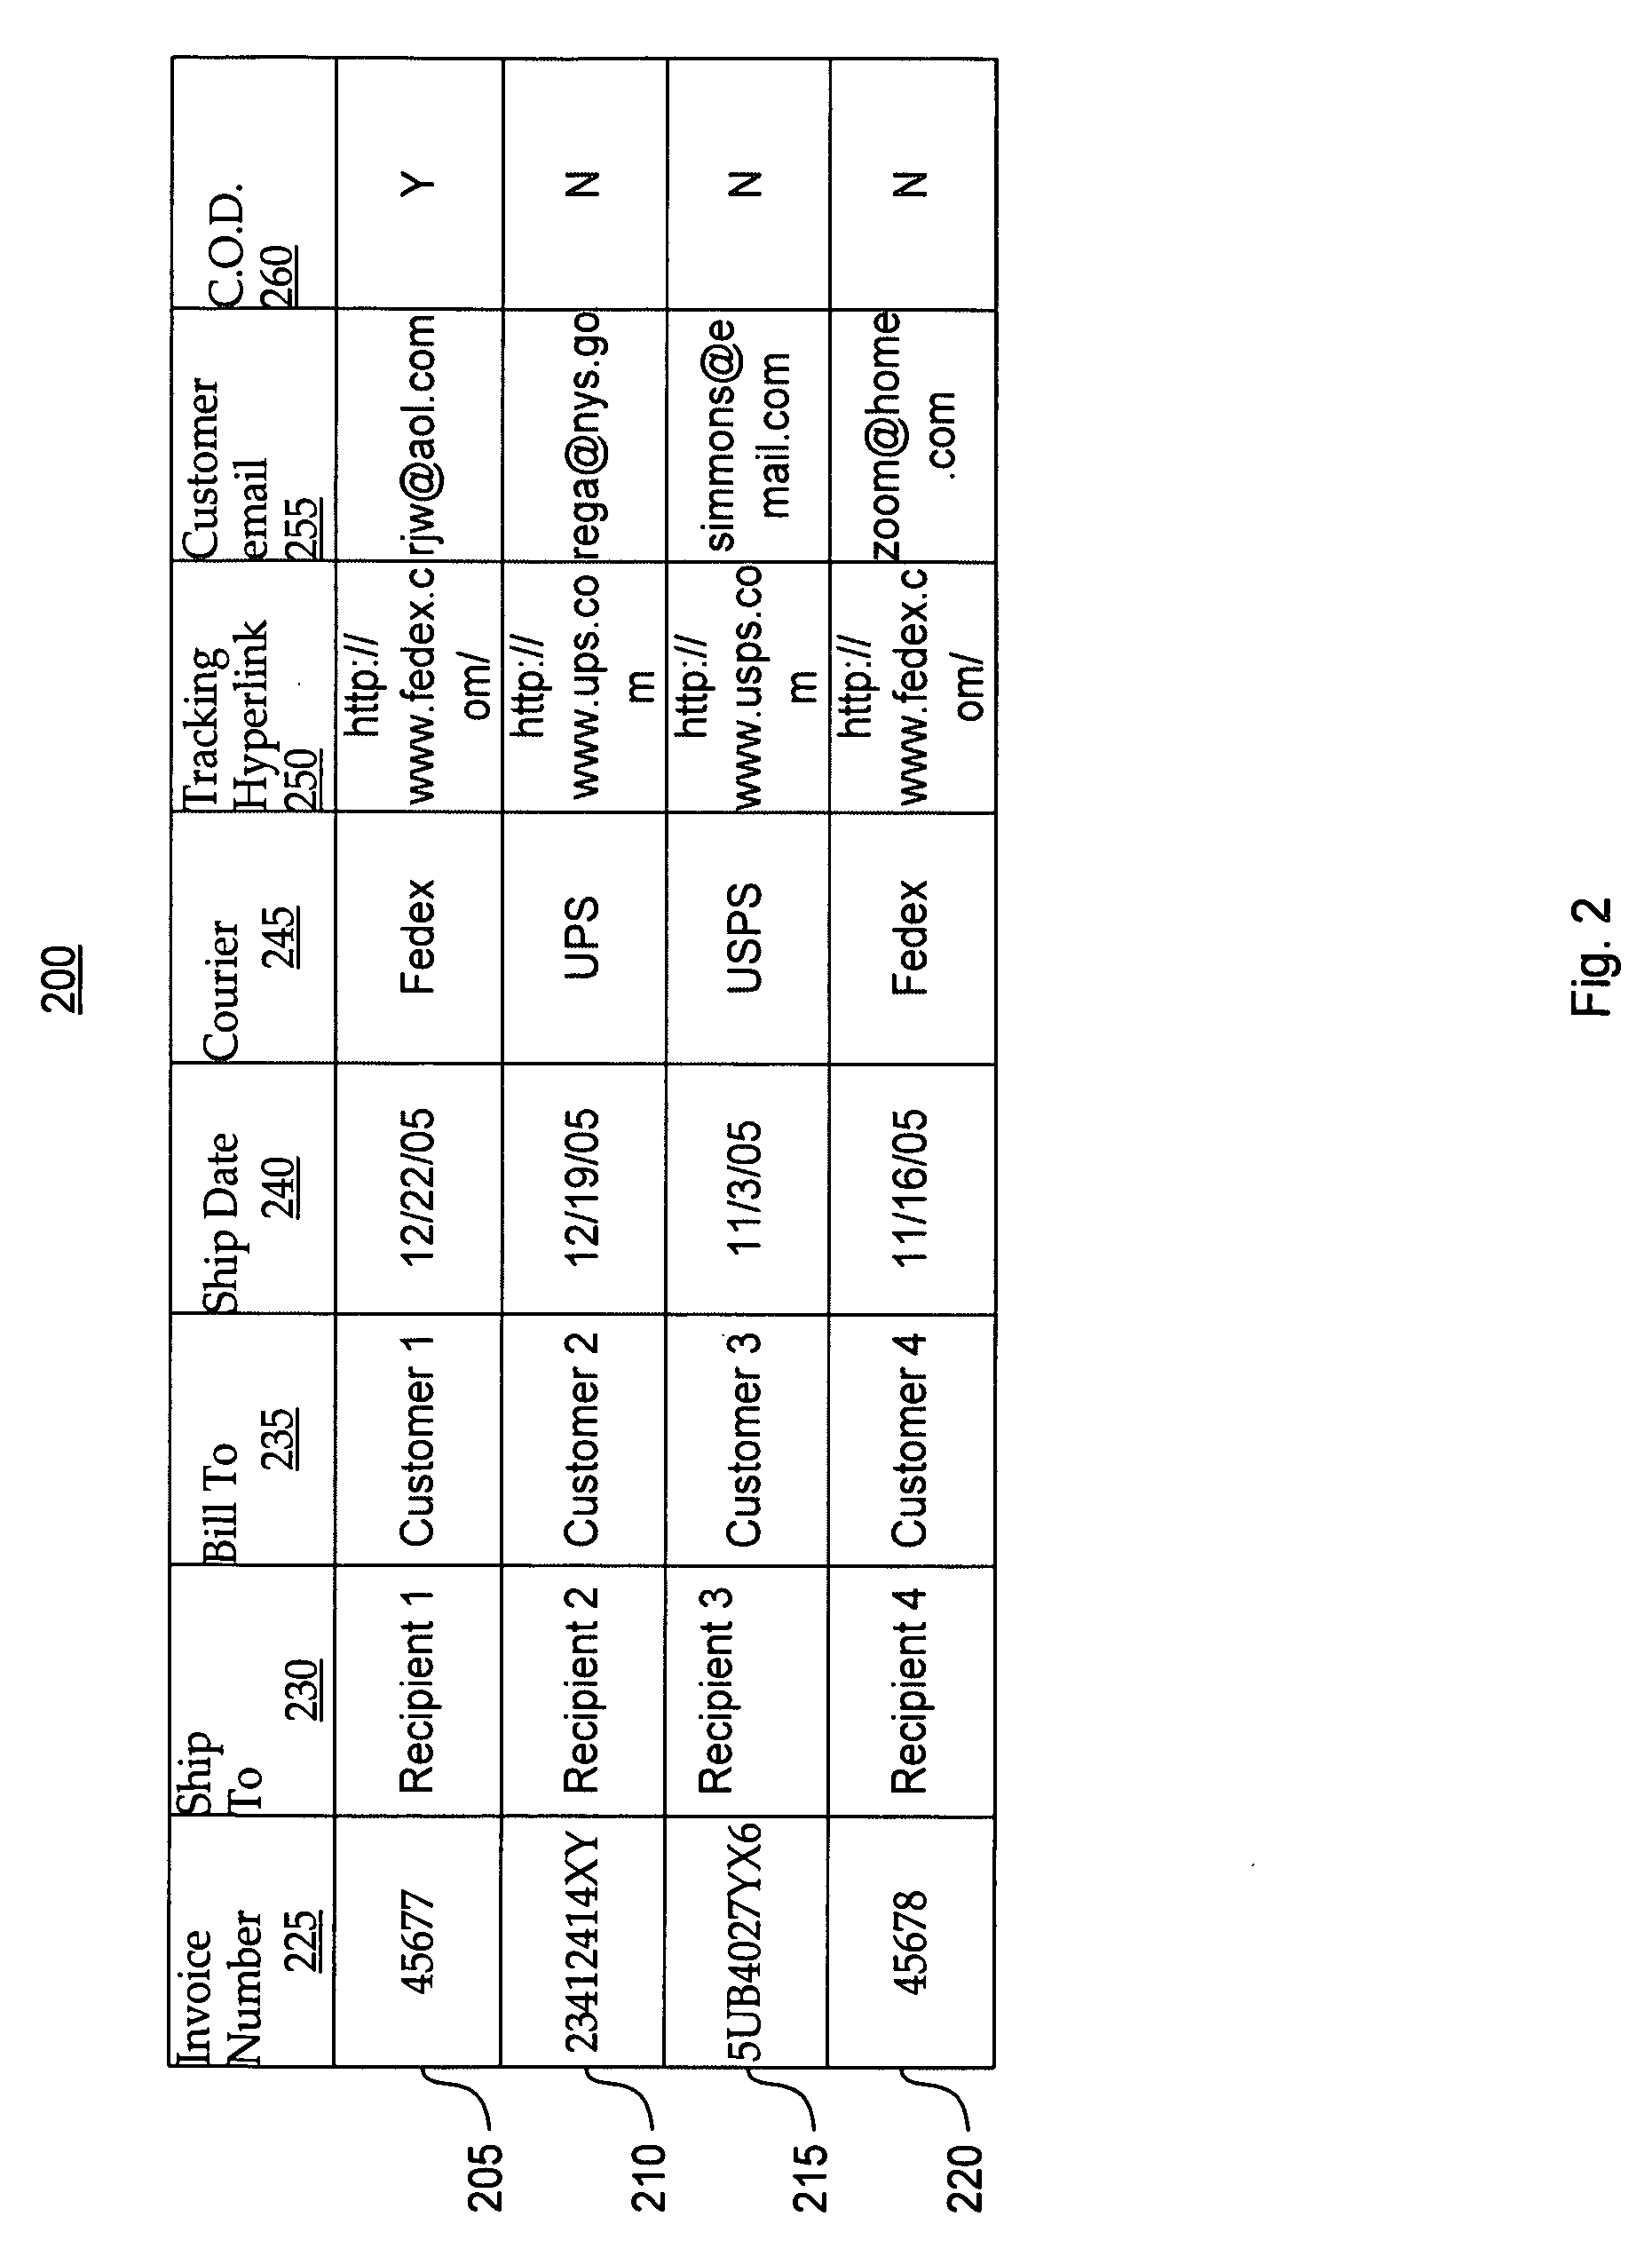 Combined shipping and accounting system